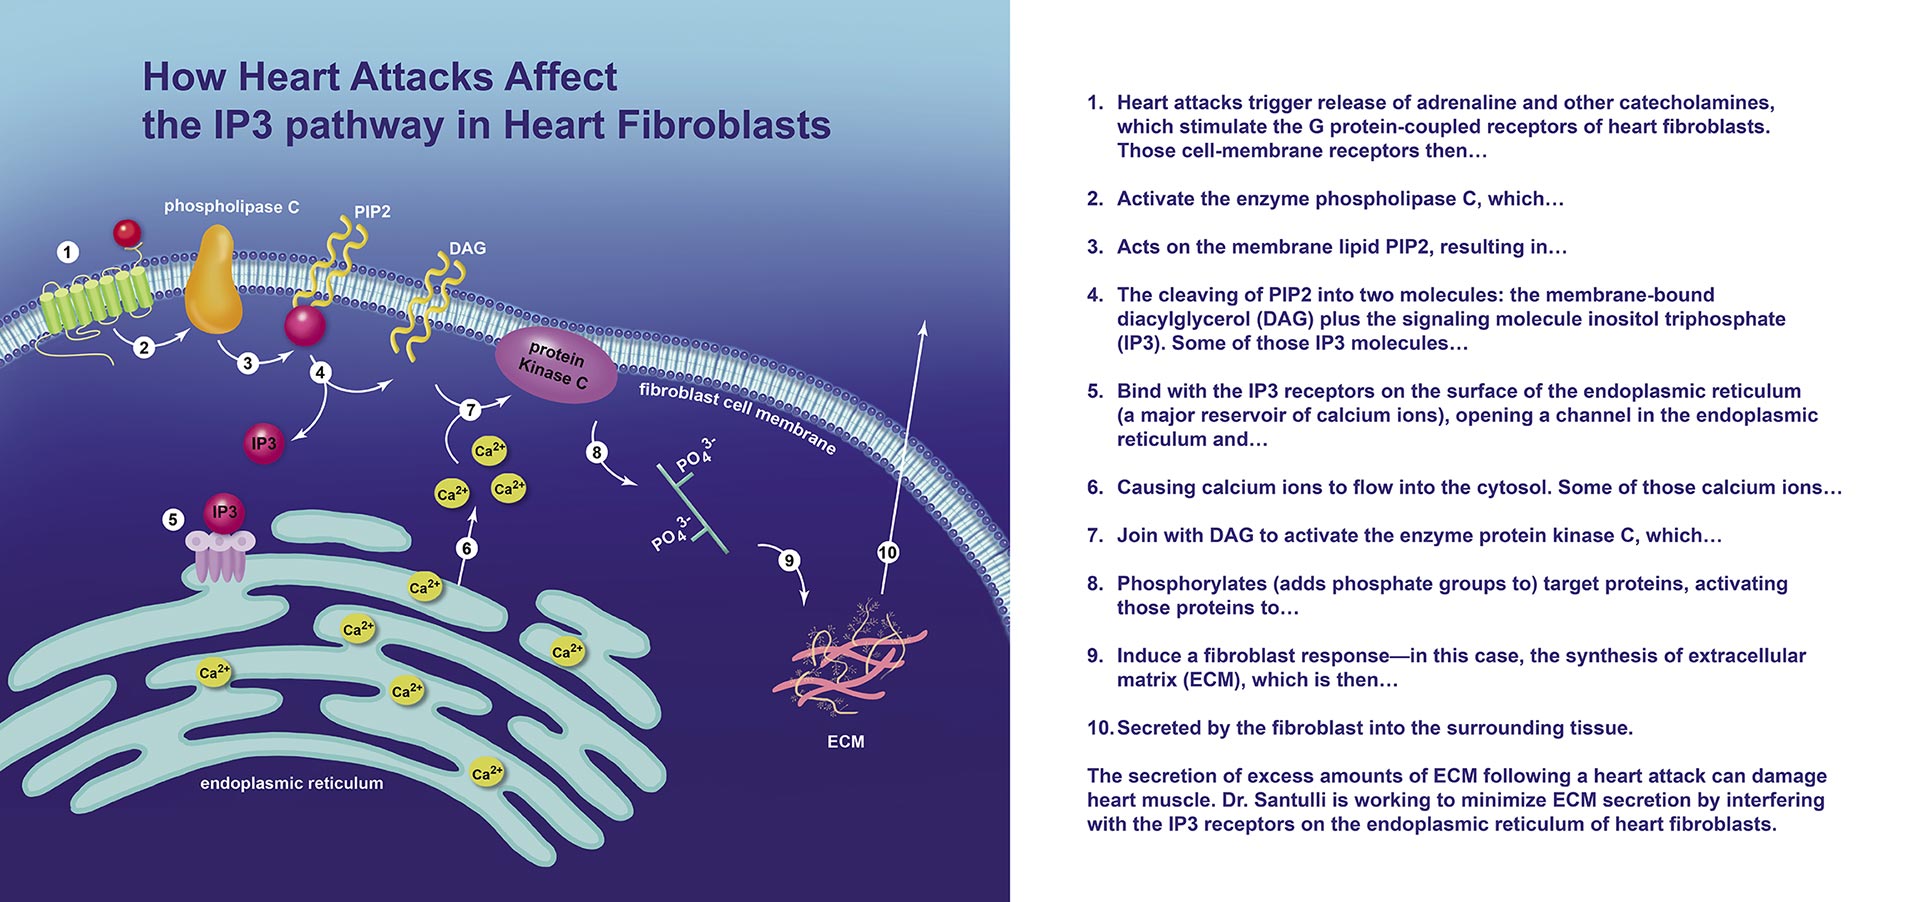 How Heart Attacks Affect the IP3 Pathway in Heart Fibroblasts